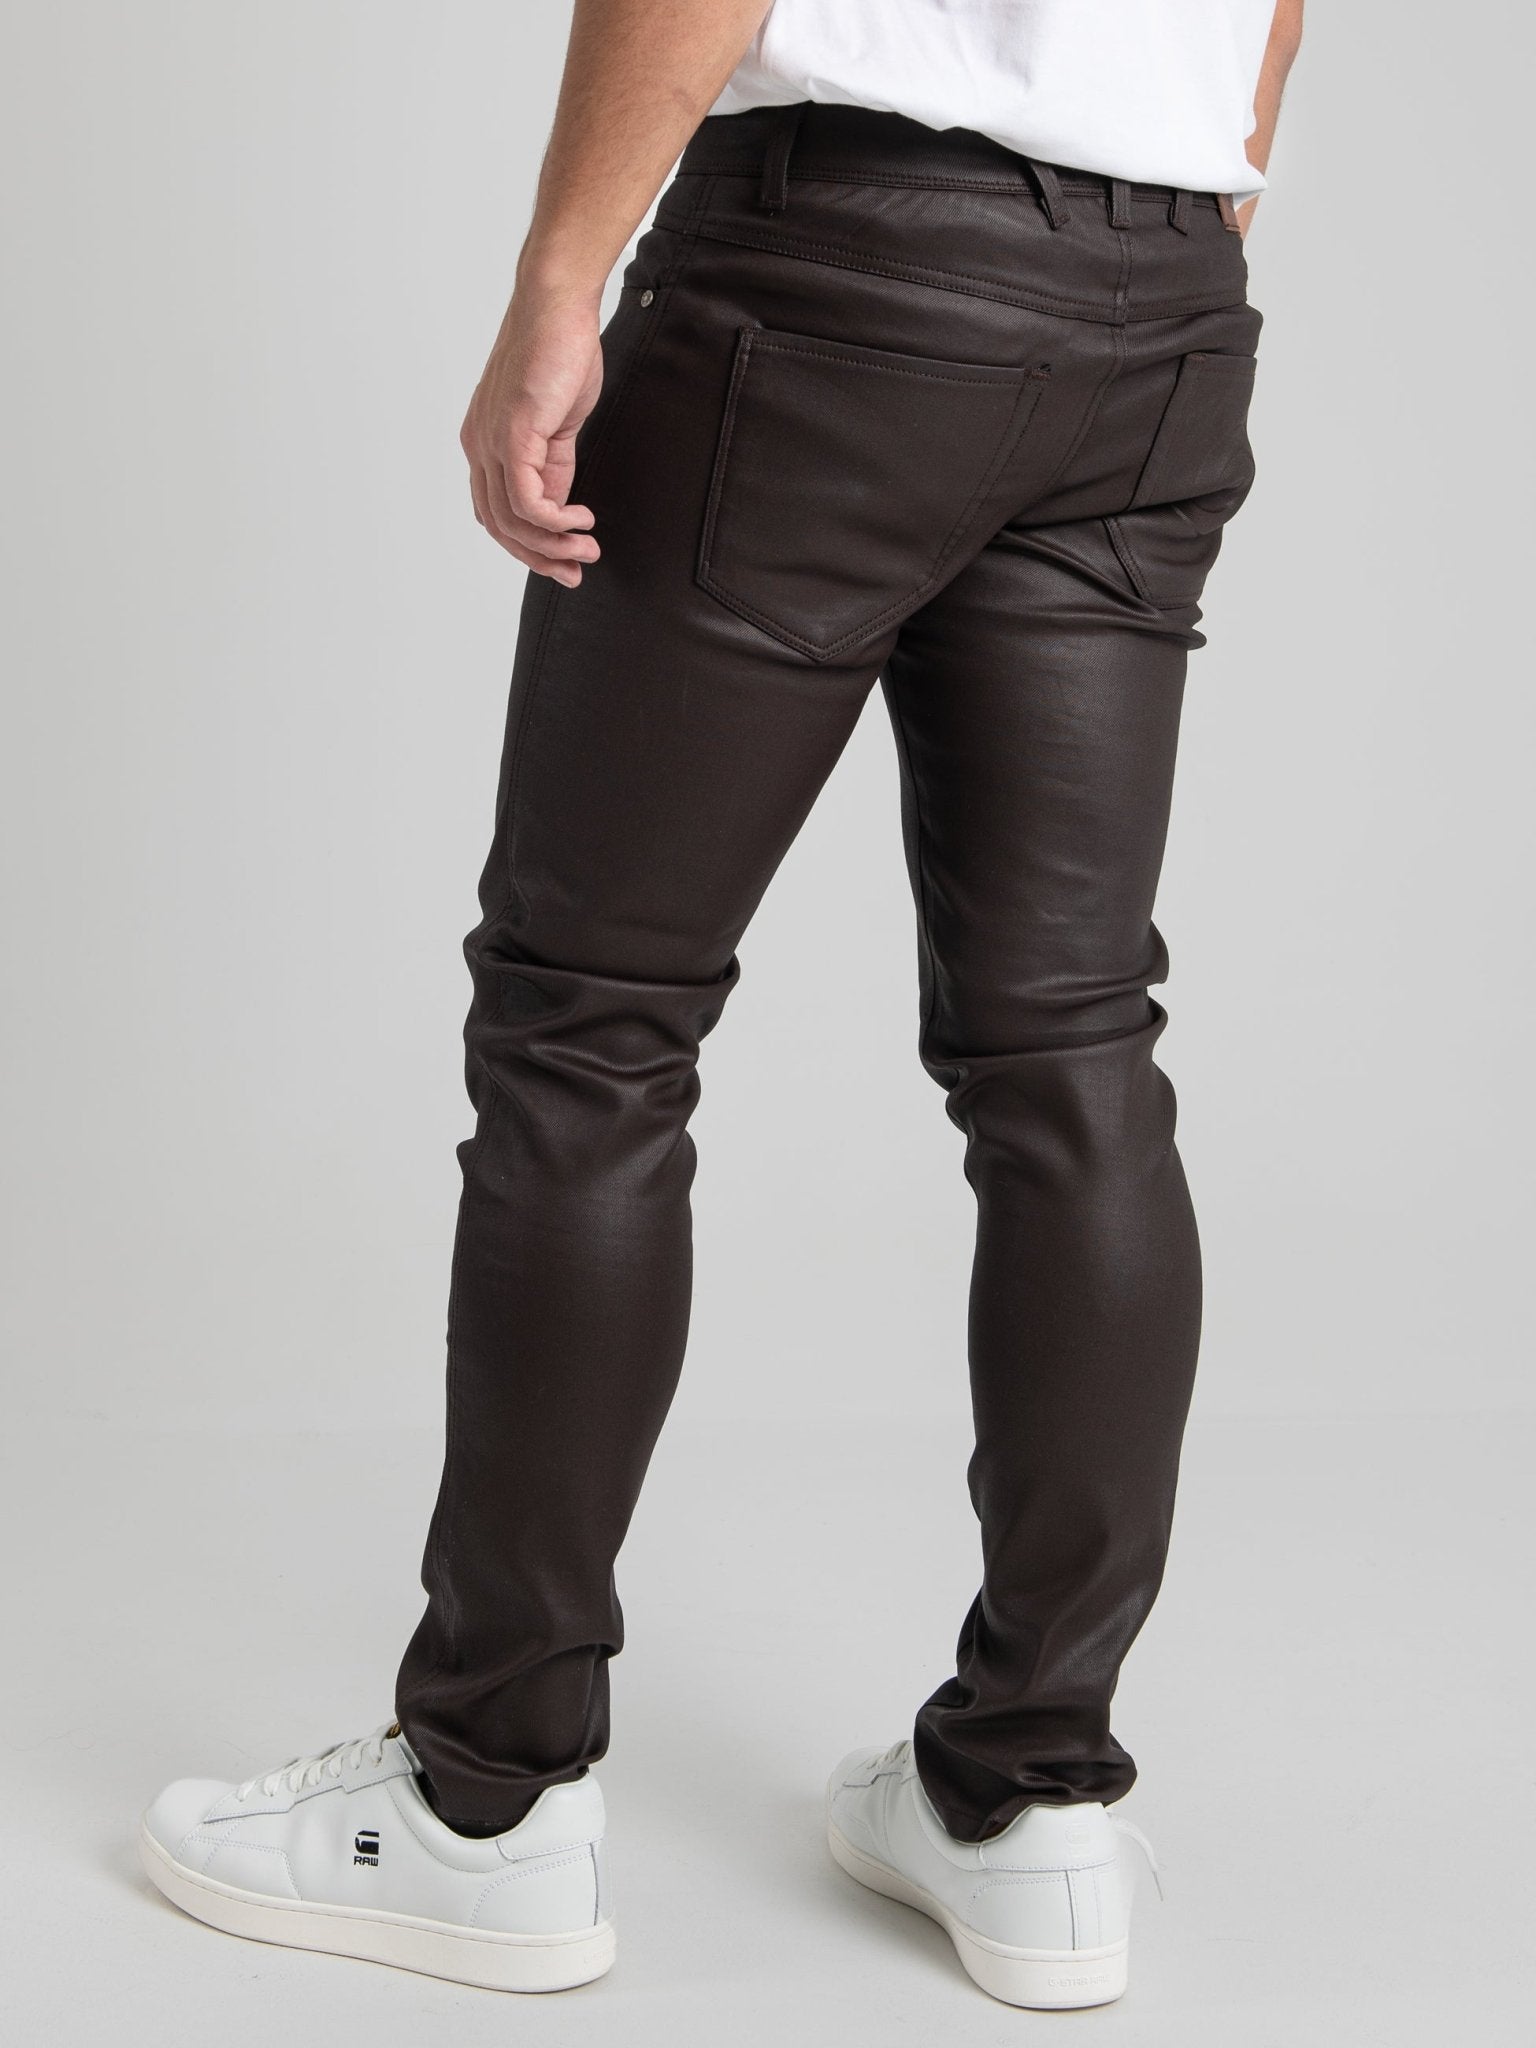 Wax Leather Coated Denim - Chocolate Brown - Ben Sherman South Africa